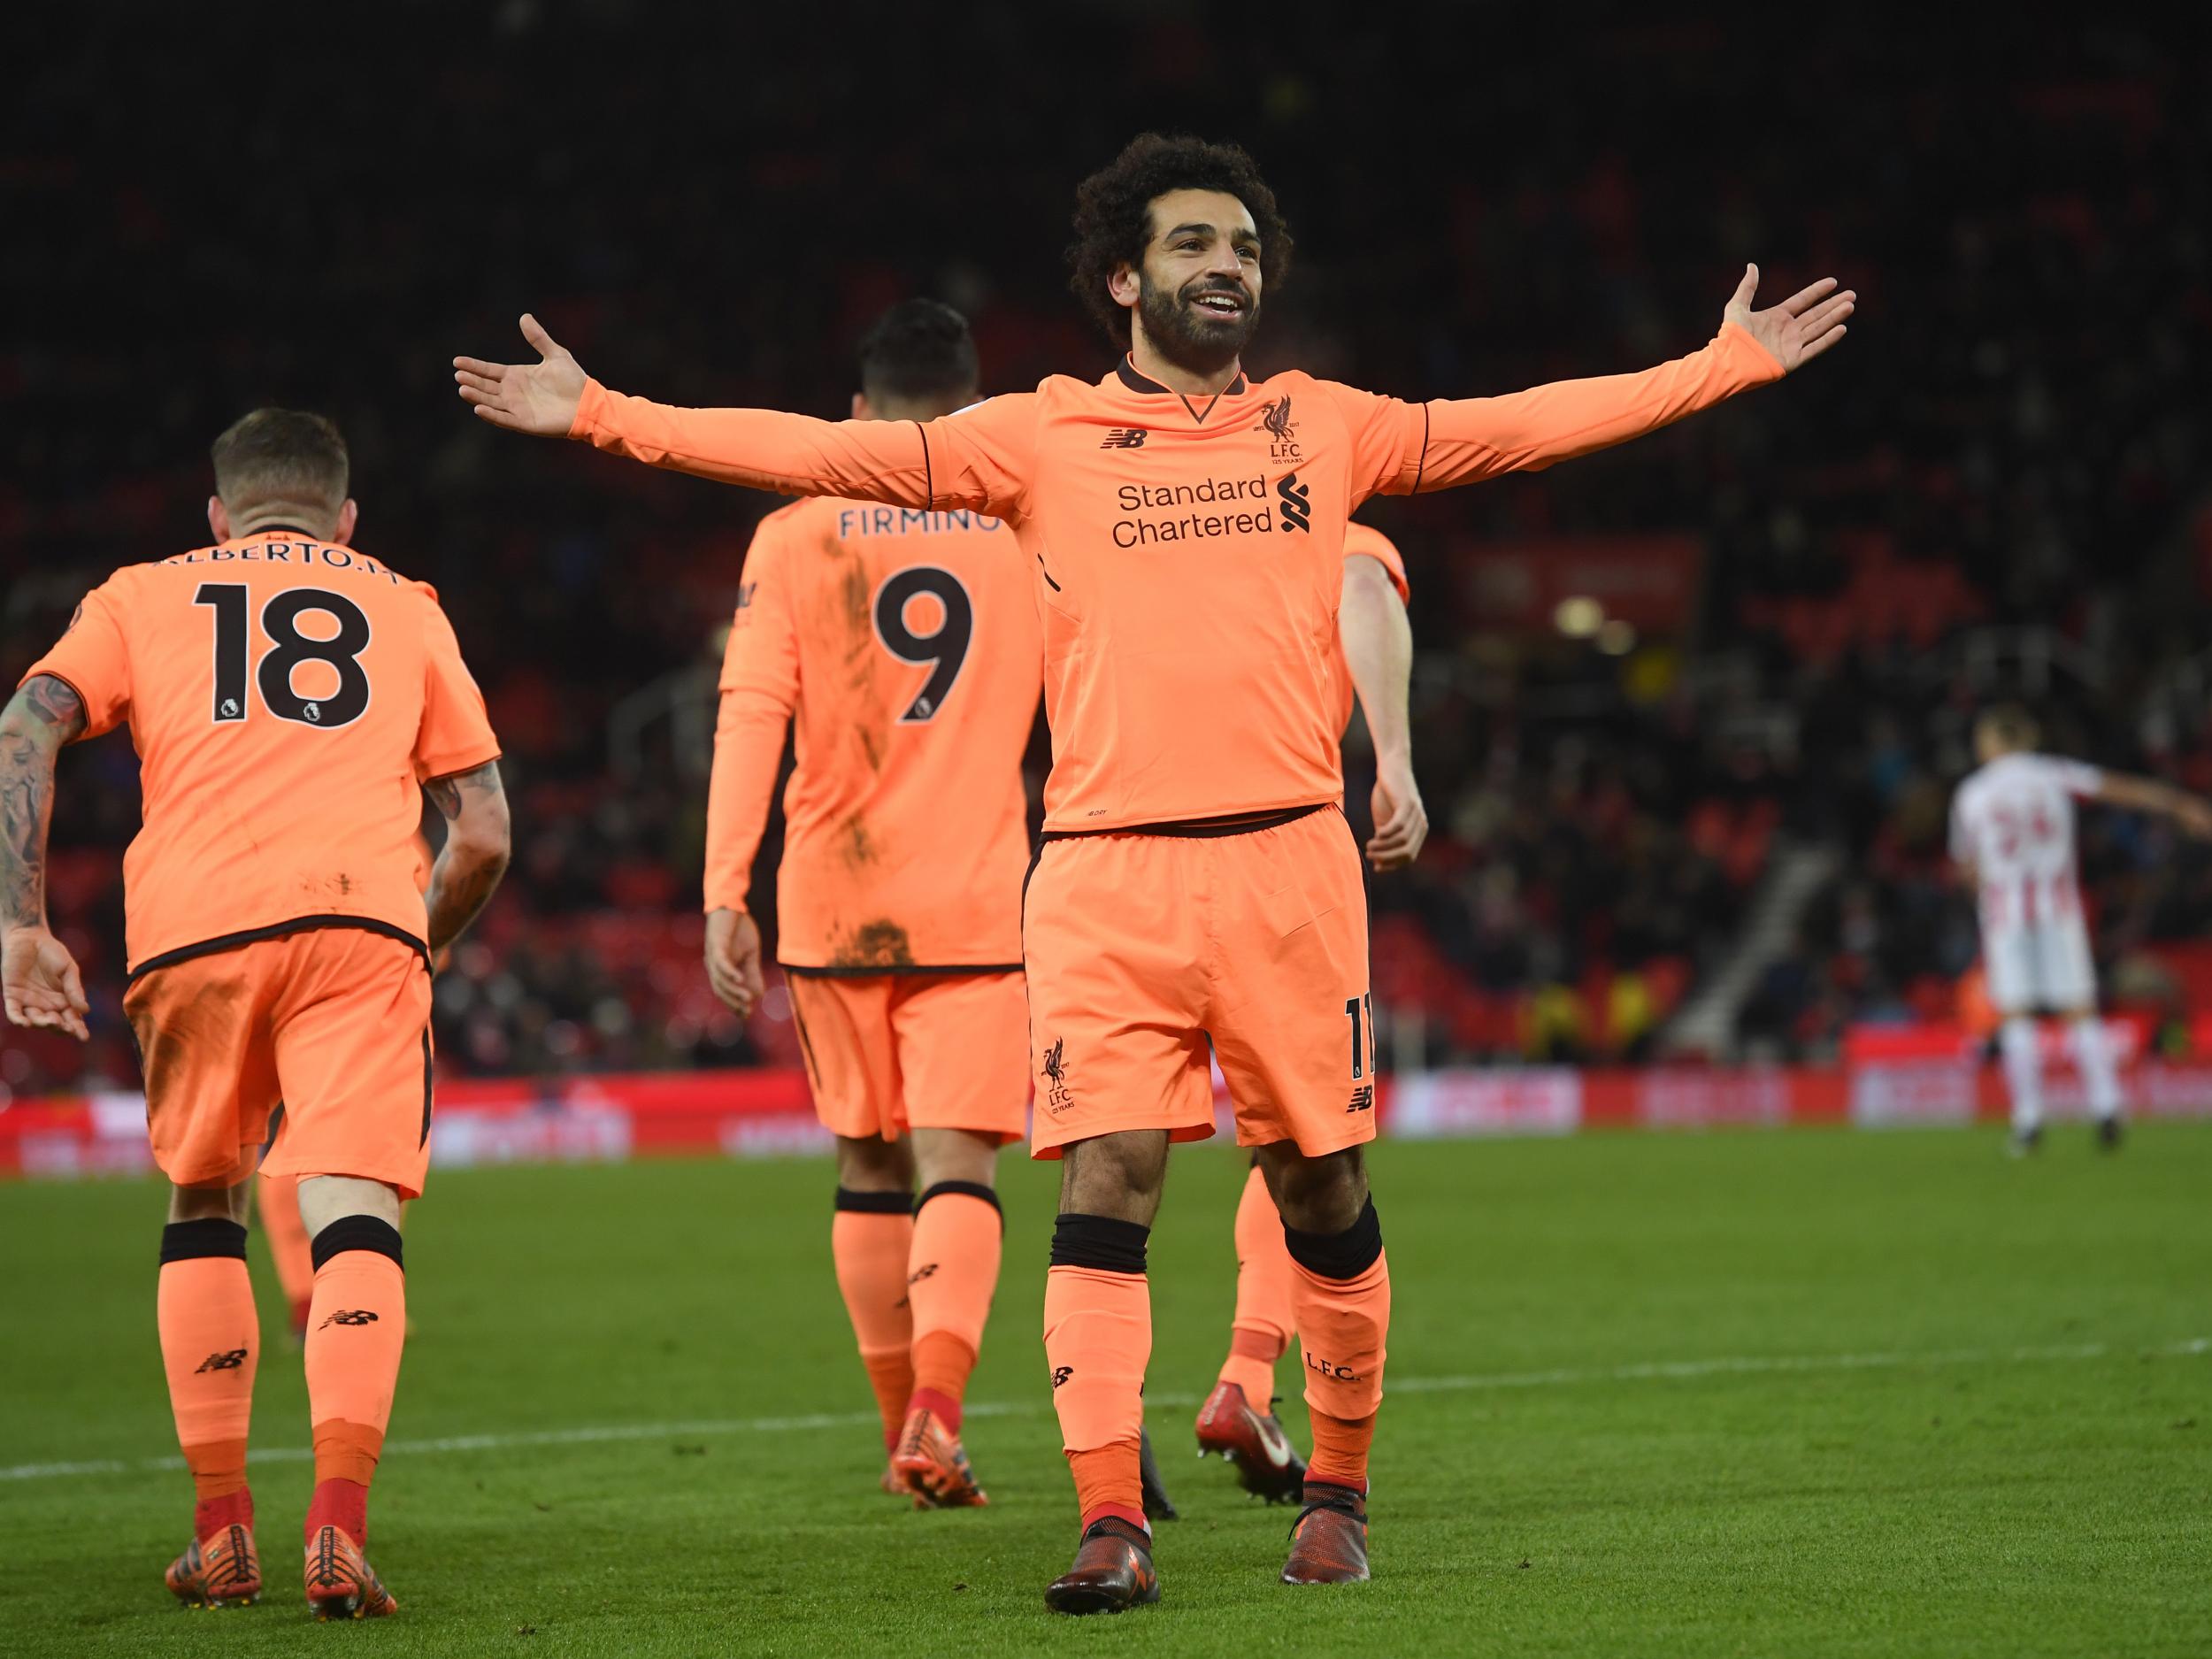 Mohamed Salah came off the bench to continue his fine season